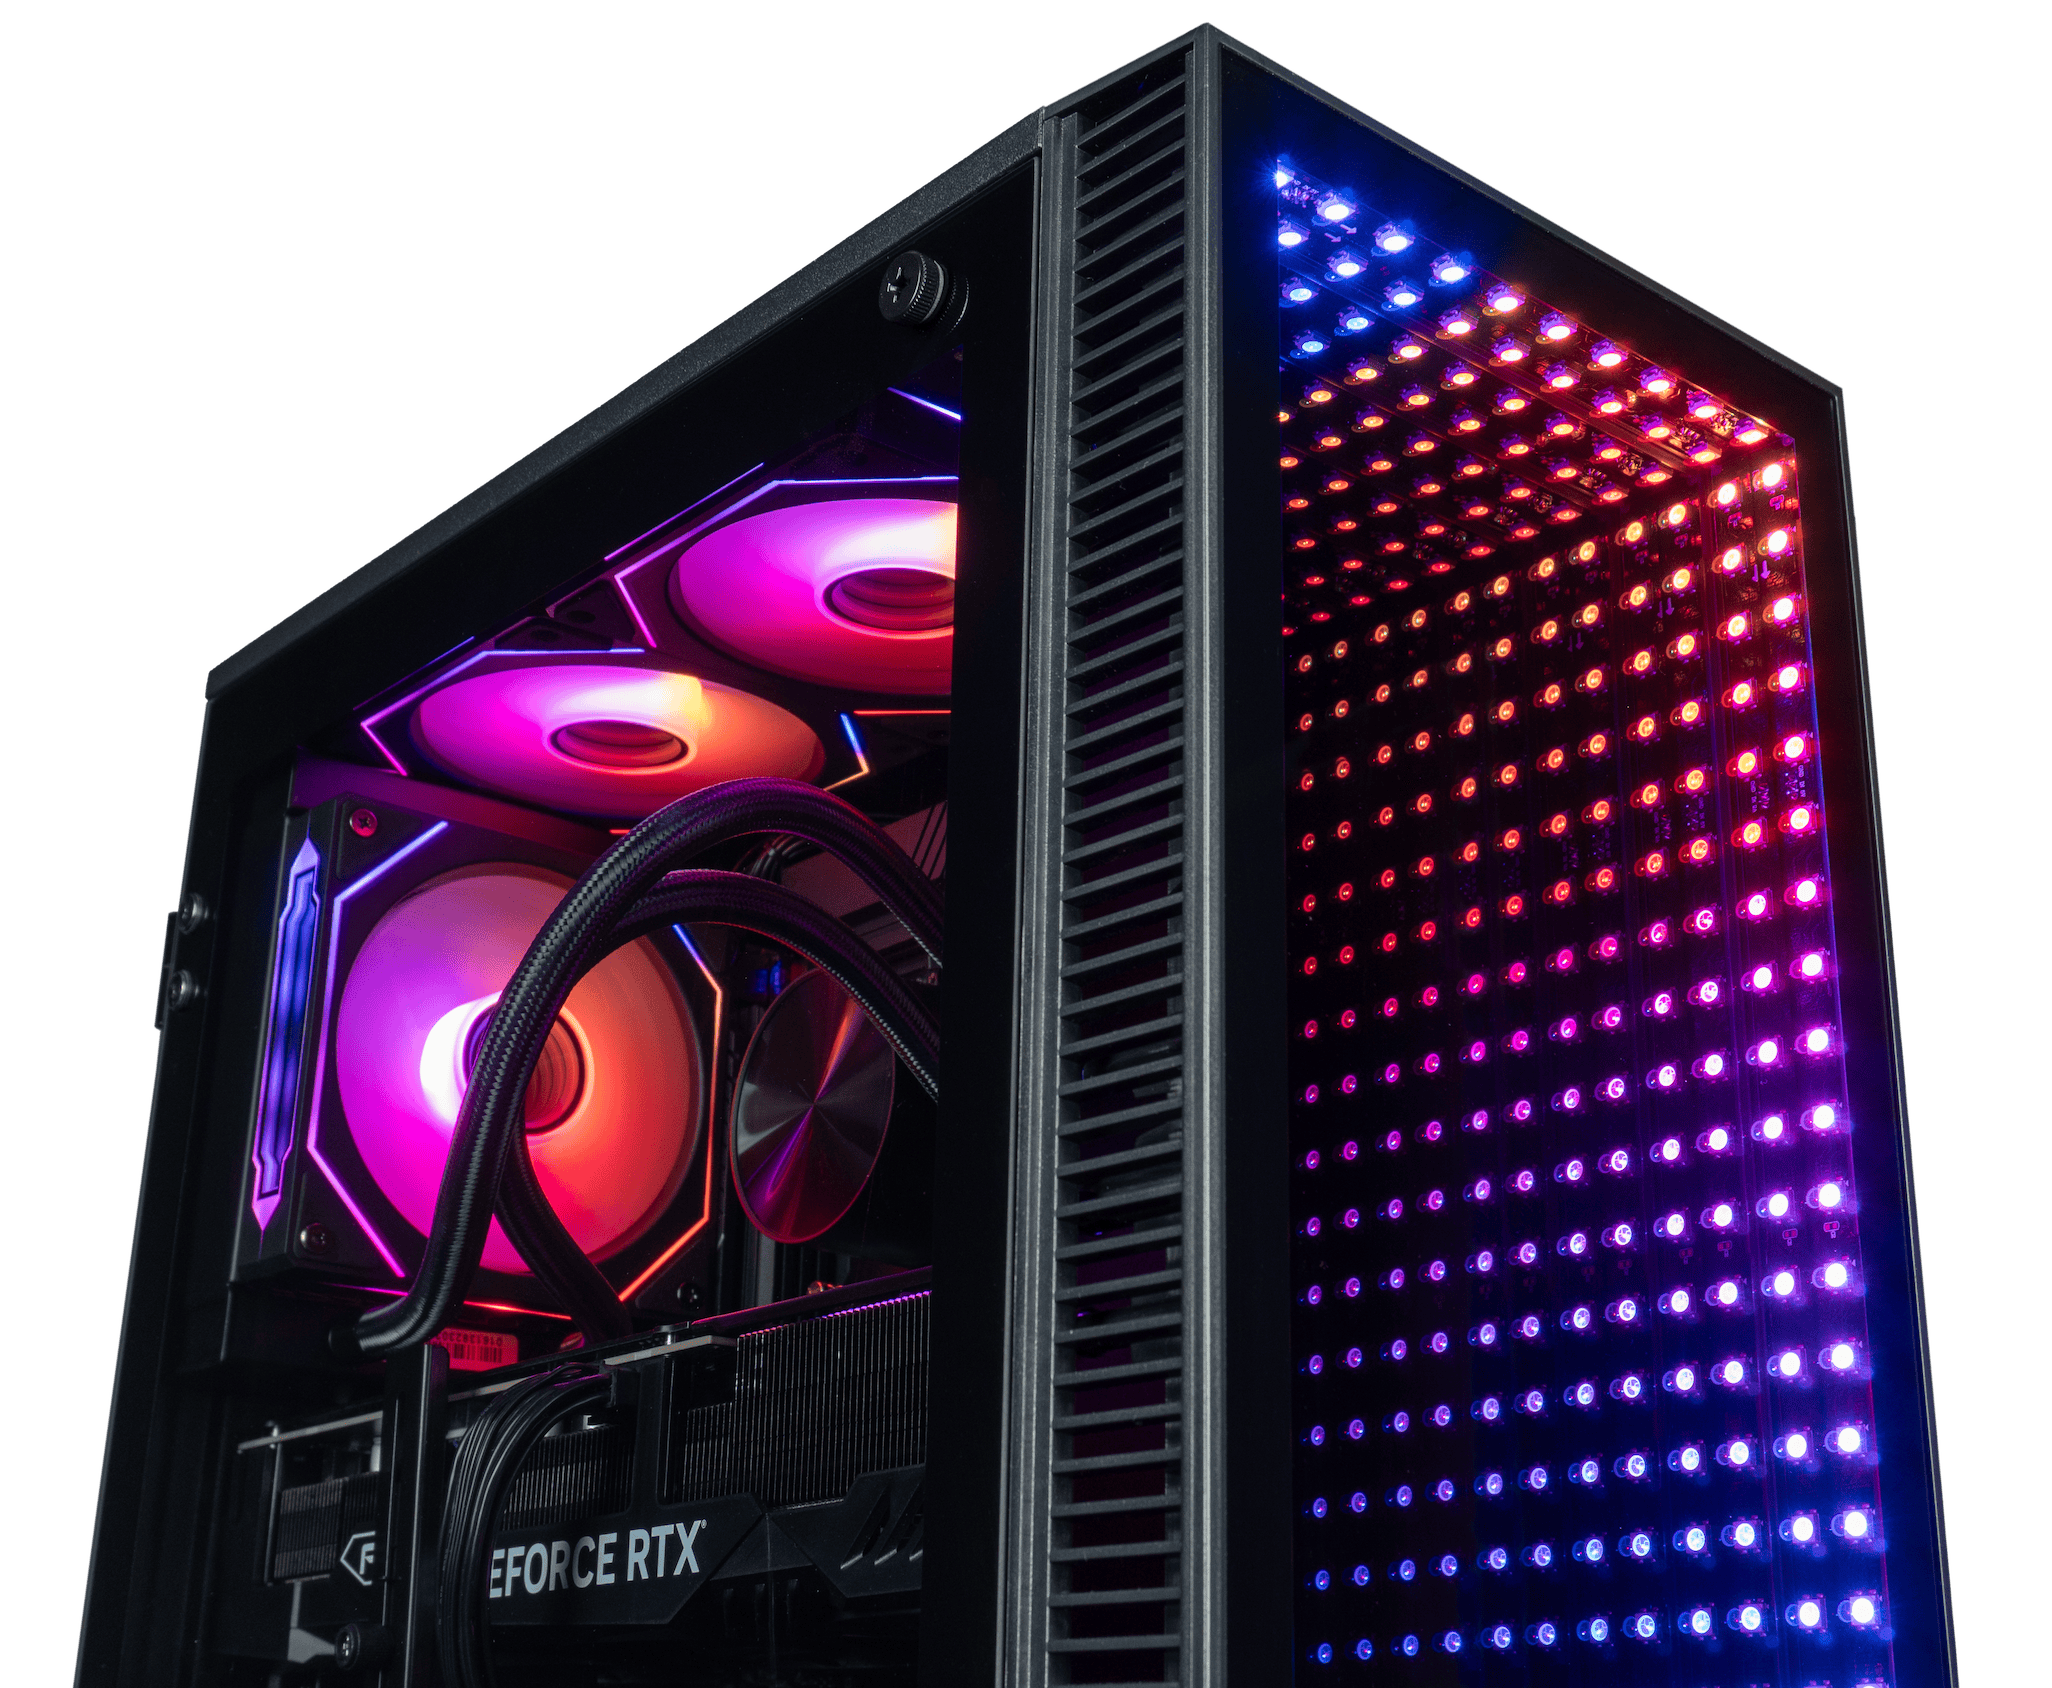 With the necessary airflow, the Continuum would make for an awesome 600W RTX 4090 TI PC unlike the ABS PC and MSI gaming PC.